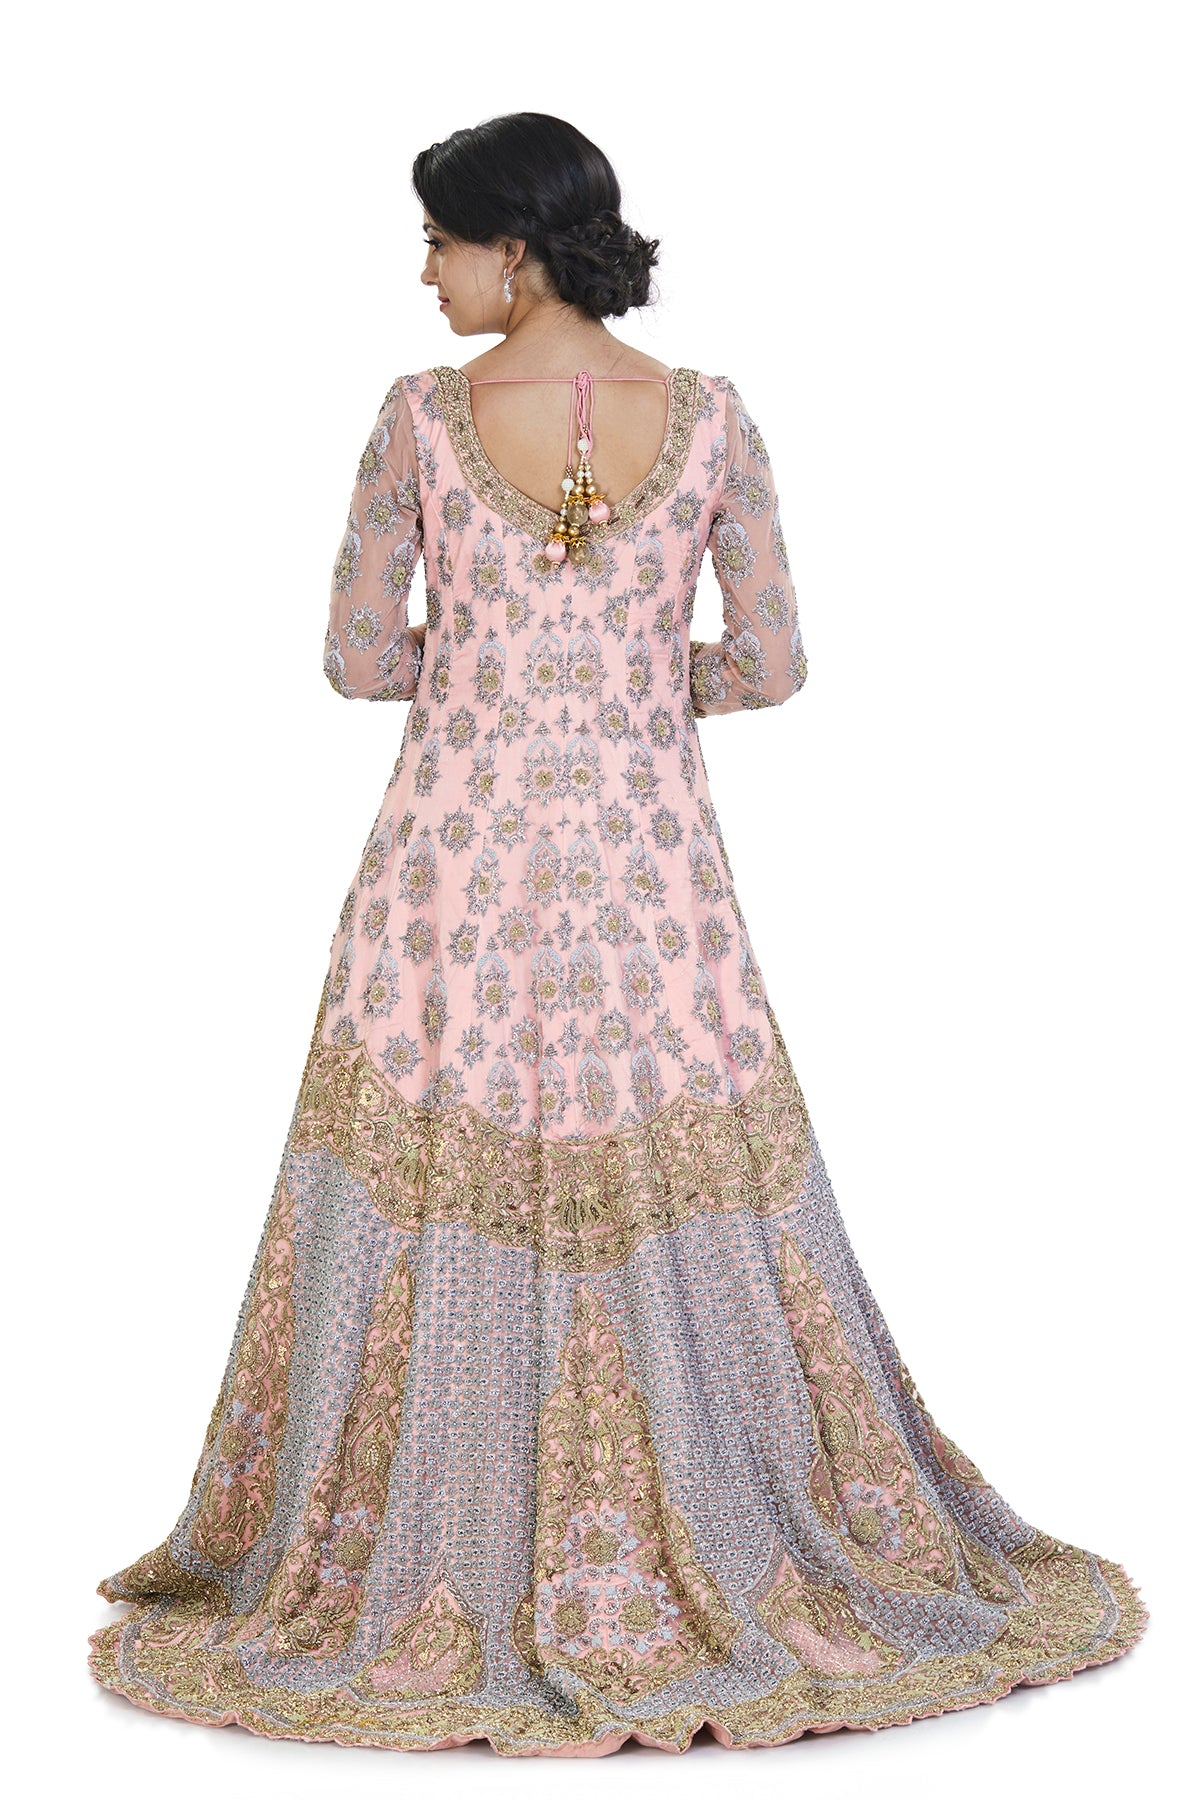 Baby pink lehenga with long top and dupatta